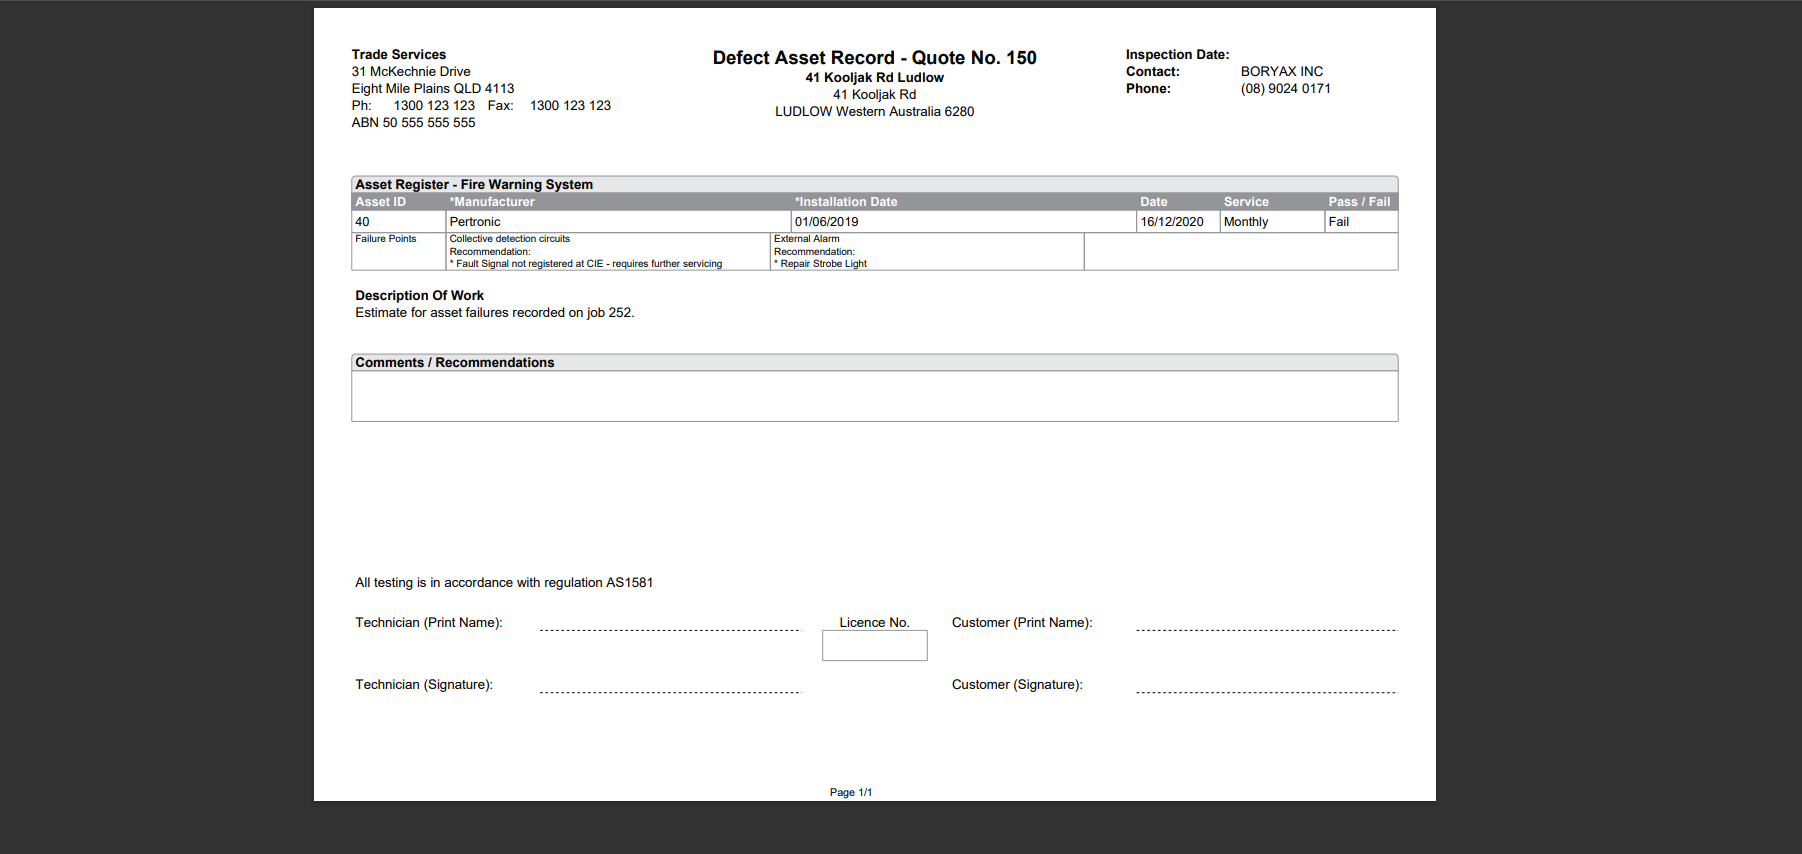 A screenshot of the Asset Record - Defect form.